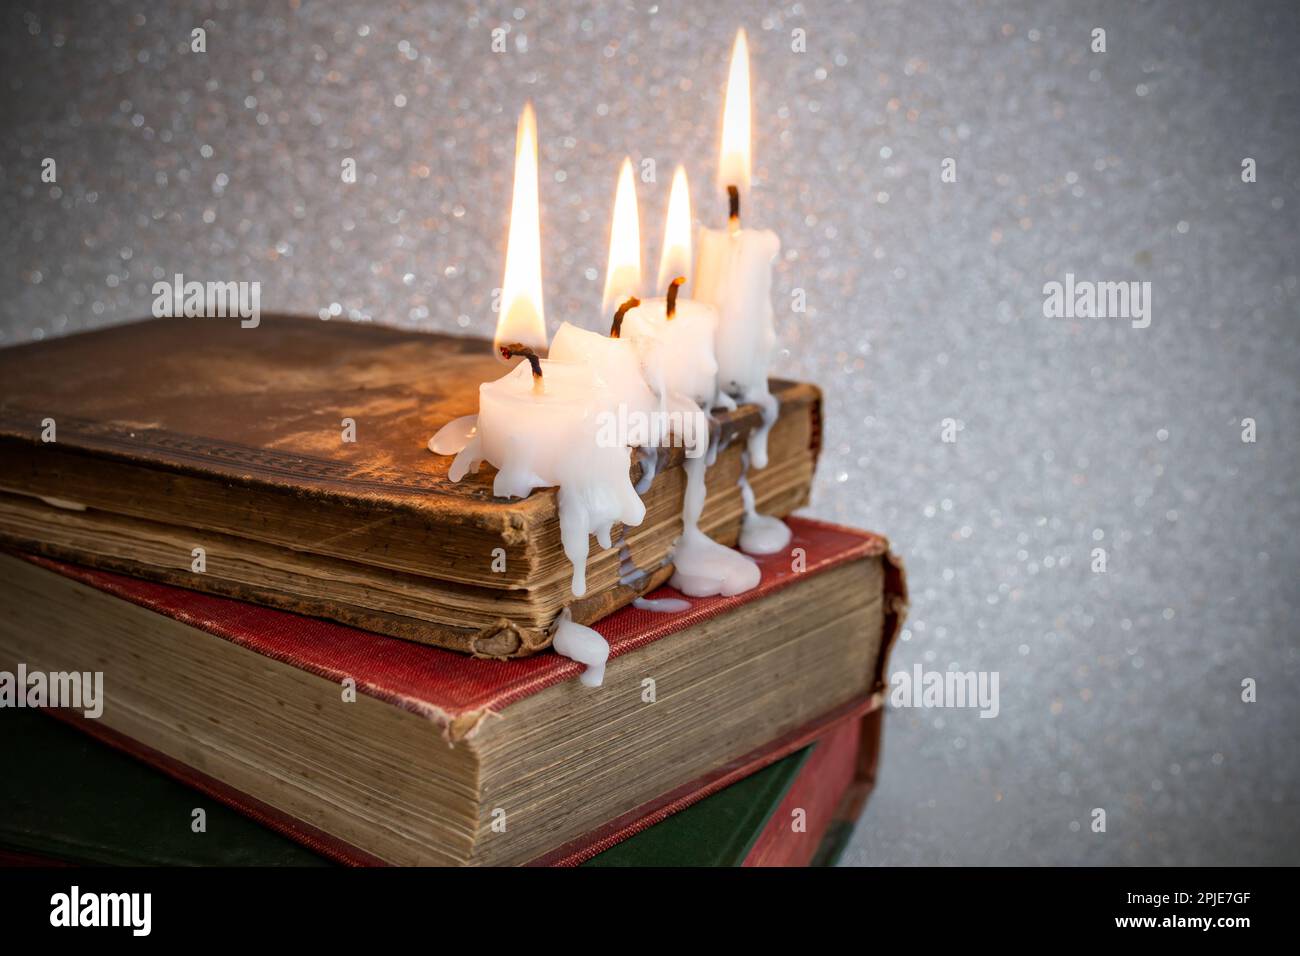 4 burning candles with dripping wax on vintage hard cover books, soft focus close up Stock Photo